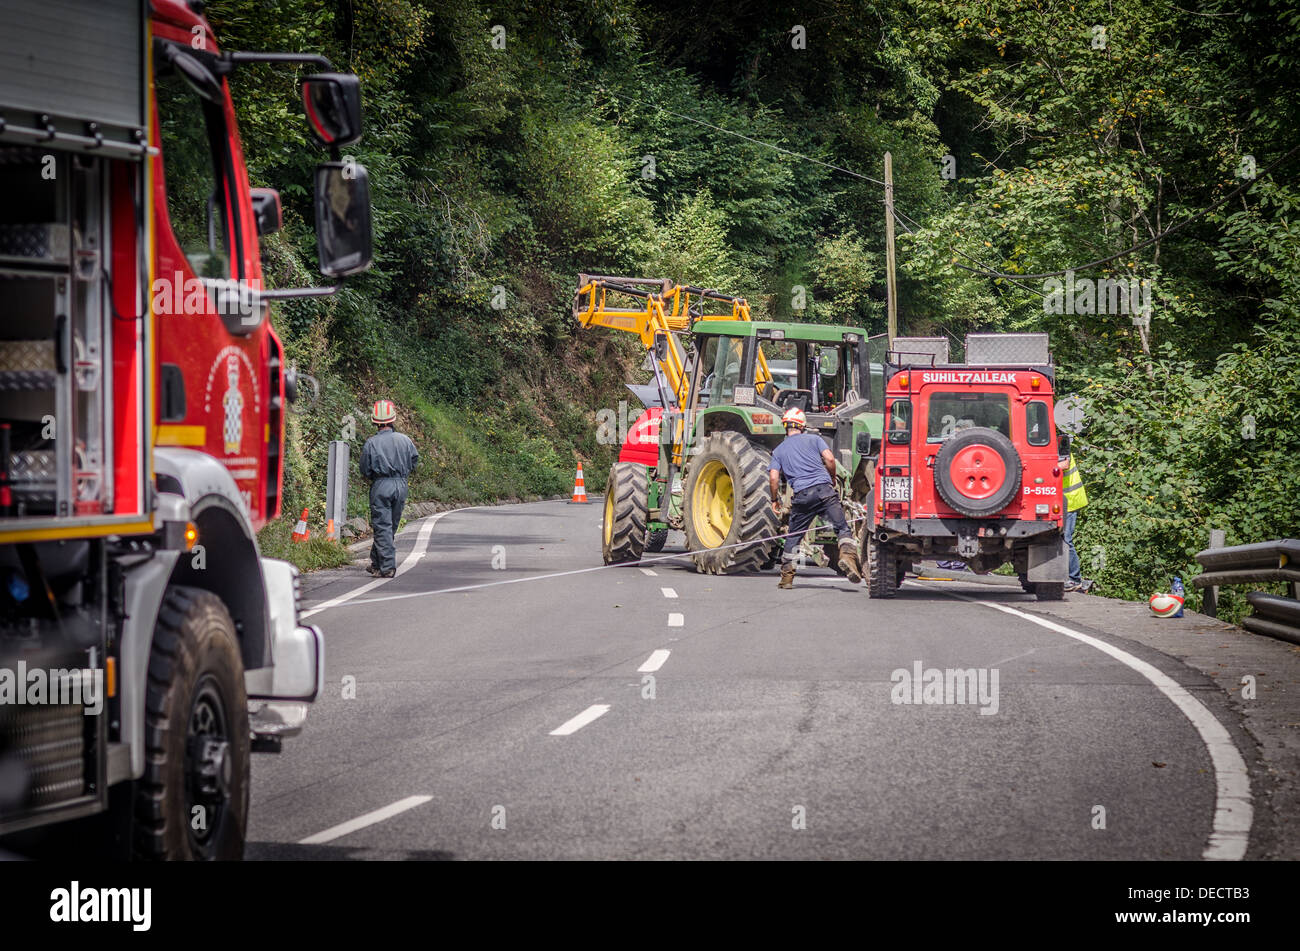 Fire service and farmer's tractor retrieve car that went over cliff edge Stock Photo